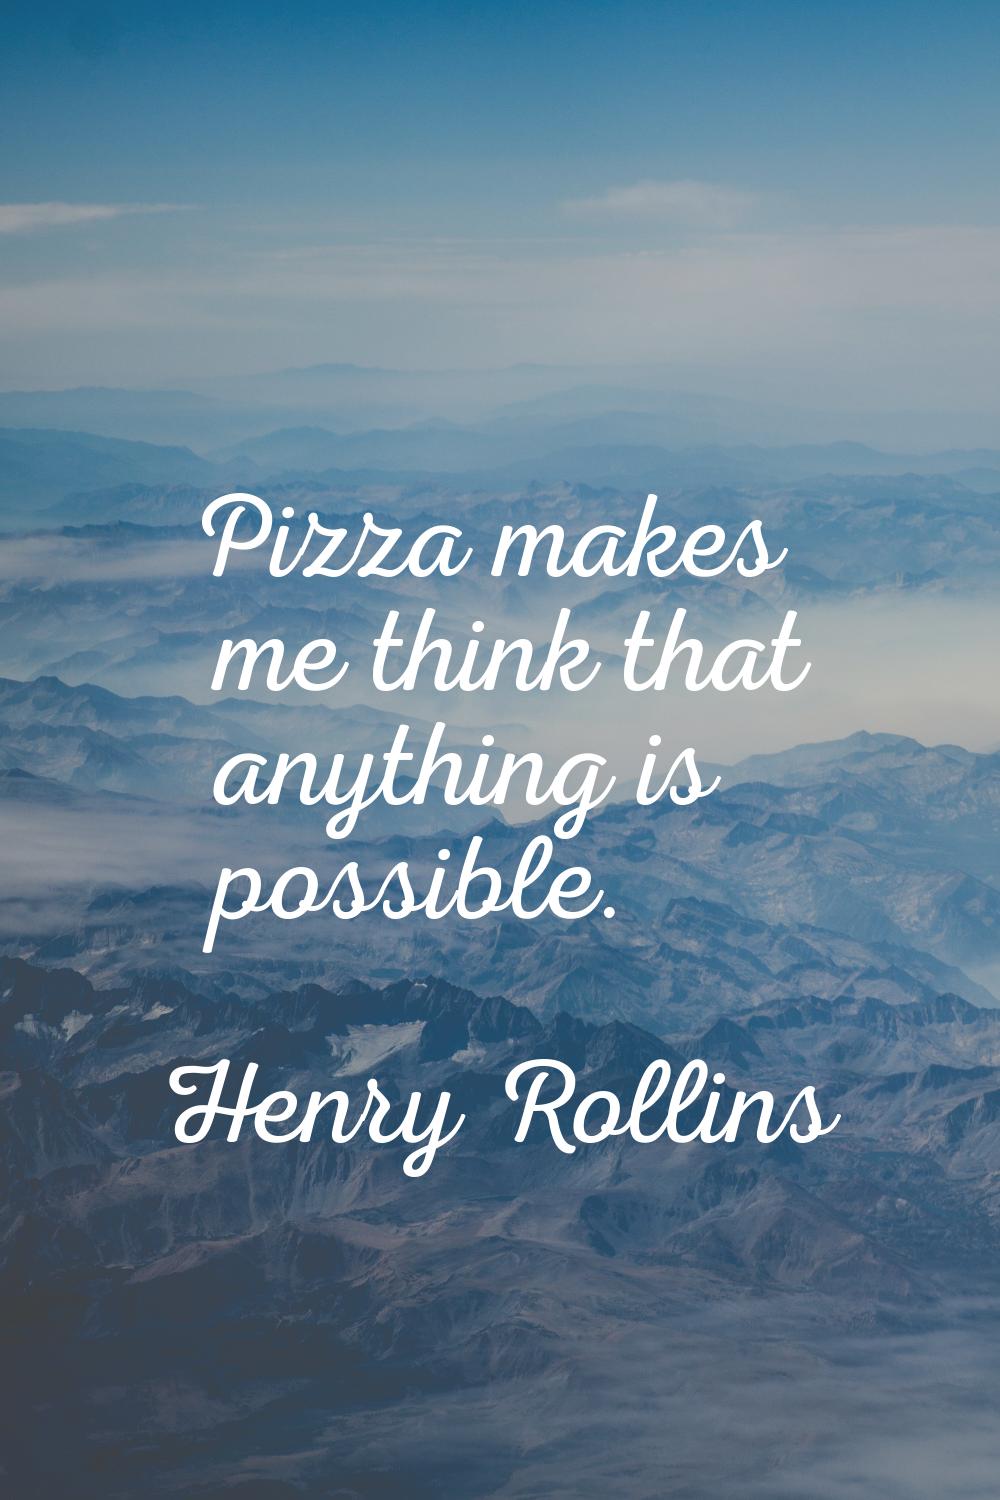 Pizza makes me think that anything is possible.